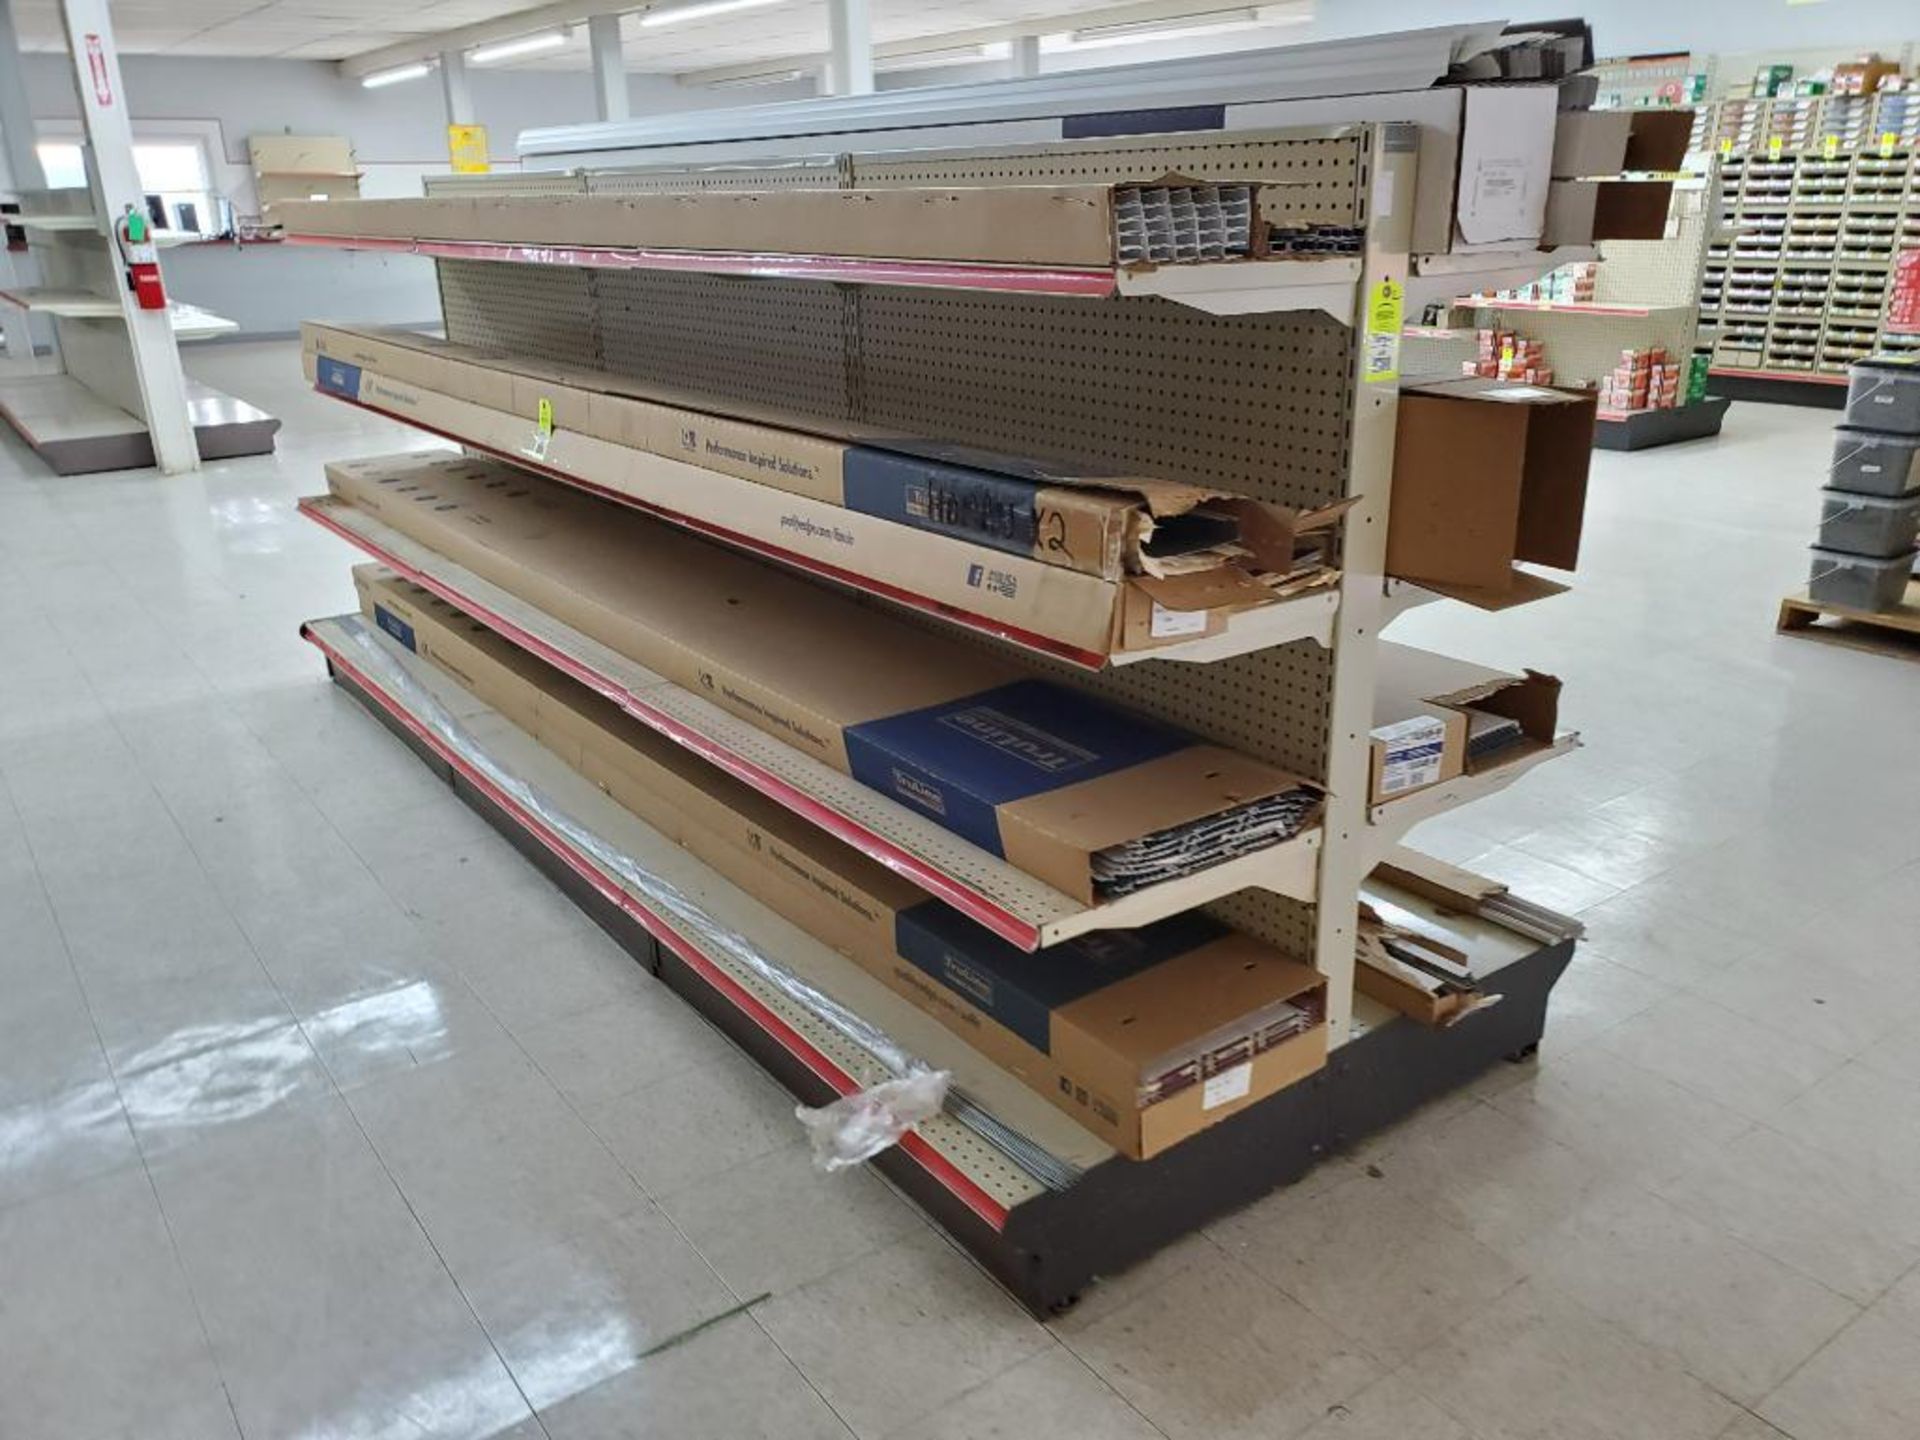 Retail shelving. Contents not included. Delayed removal until contents have been removed.